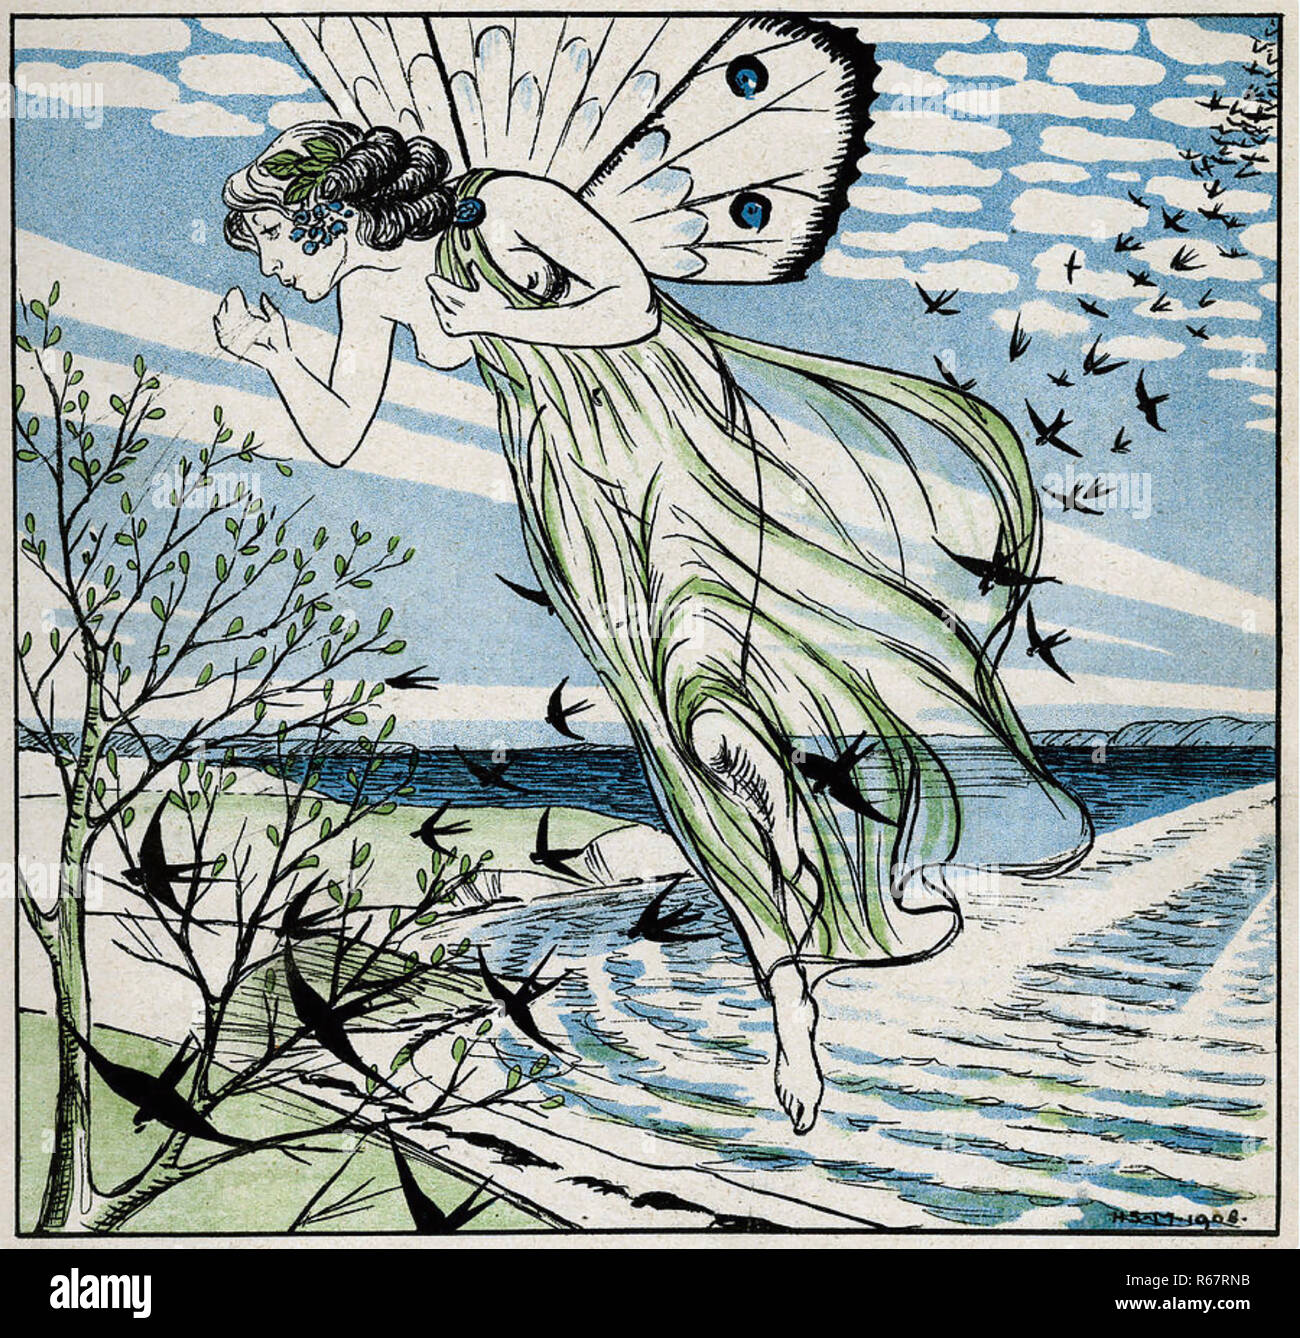 THE COMING OF SPRING in a 1908 drawing by Herbert Saly showing the Spring Fairy breathing new life into the trees. Stock Photo